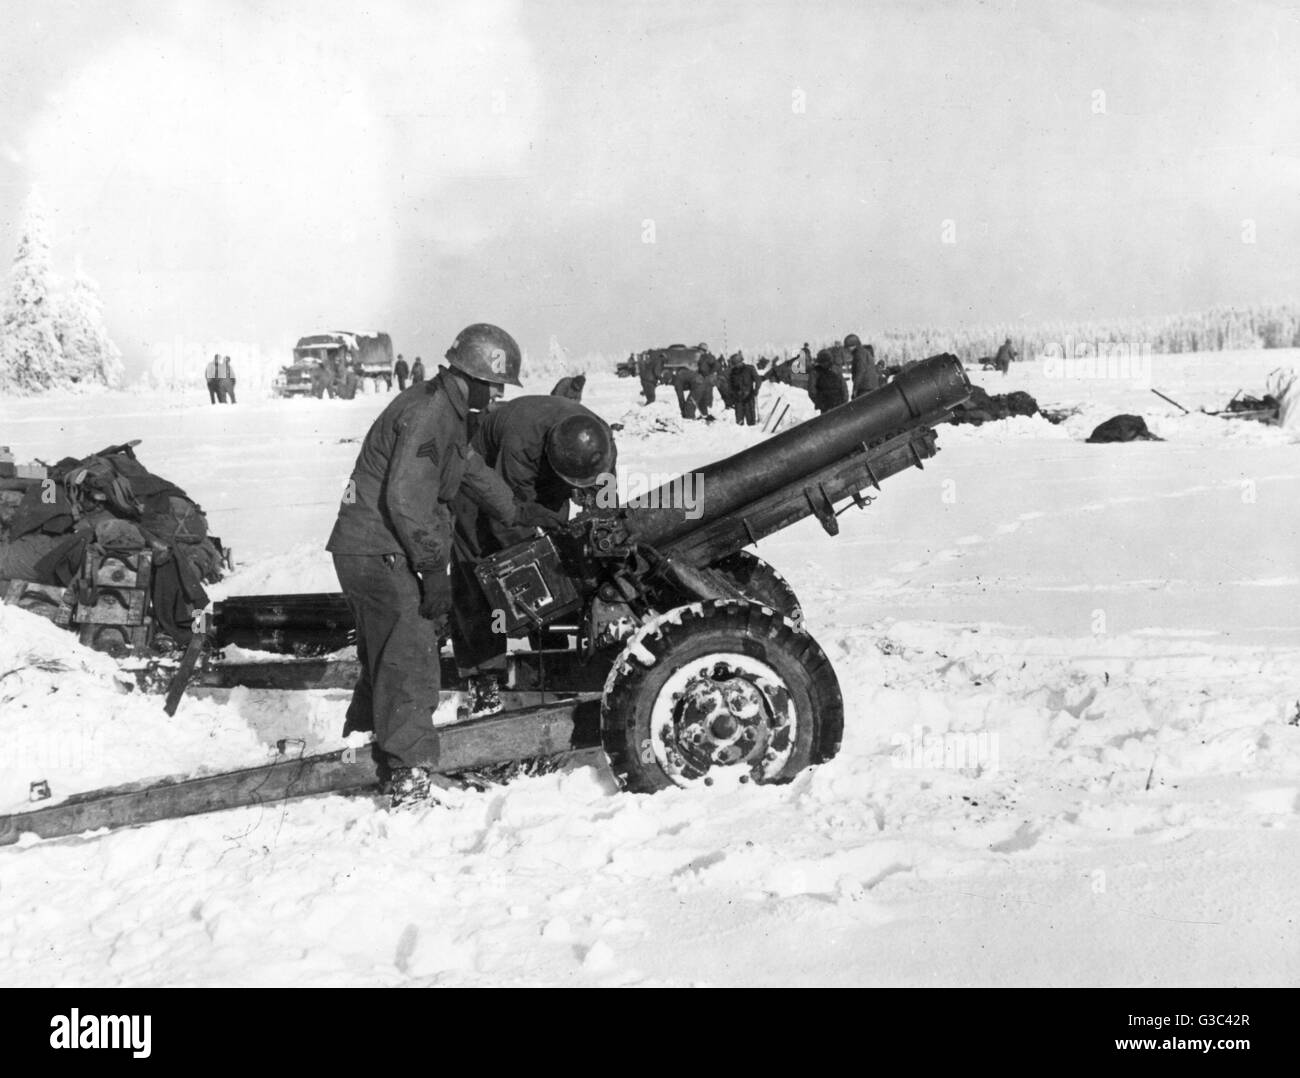 American soldiers of the 84th Division, 1st U.S.Army, set upM3 105mm howitzers in the snow near Odeigne, Belgium on the northern flank of the German salient in the Ardennes, during the Battle of the Bulge.     Date: December 1944 Stock Photo